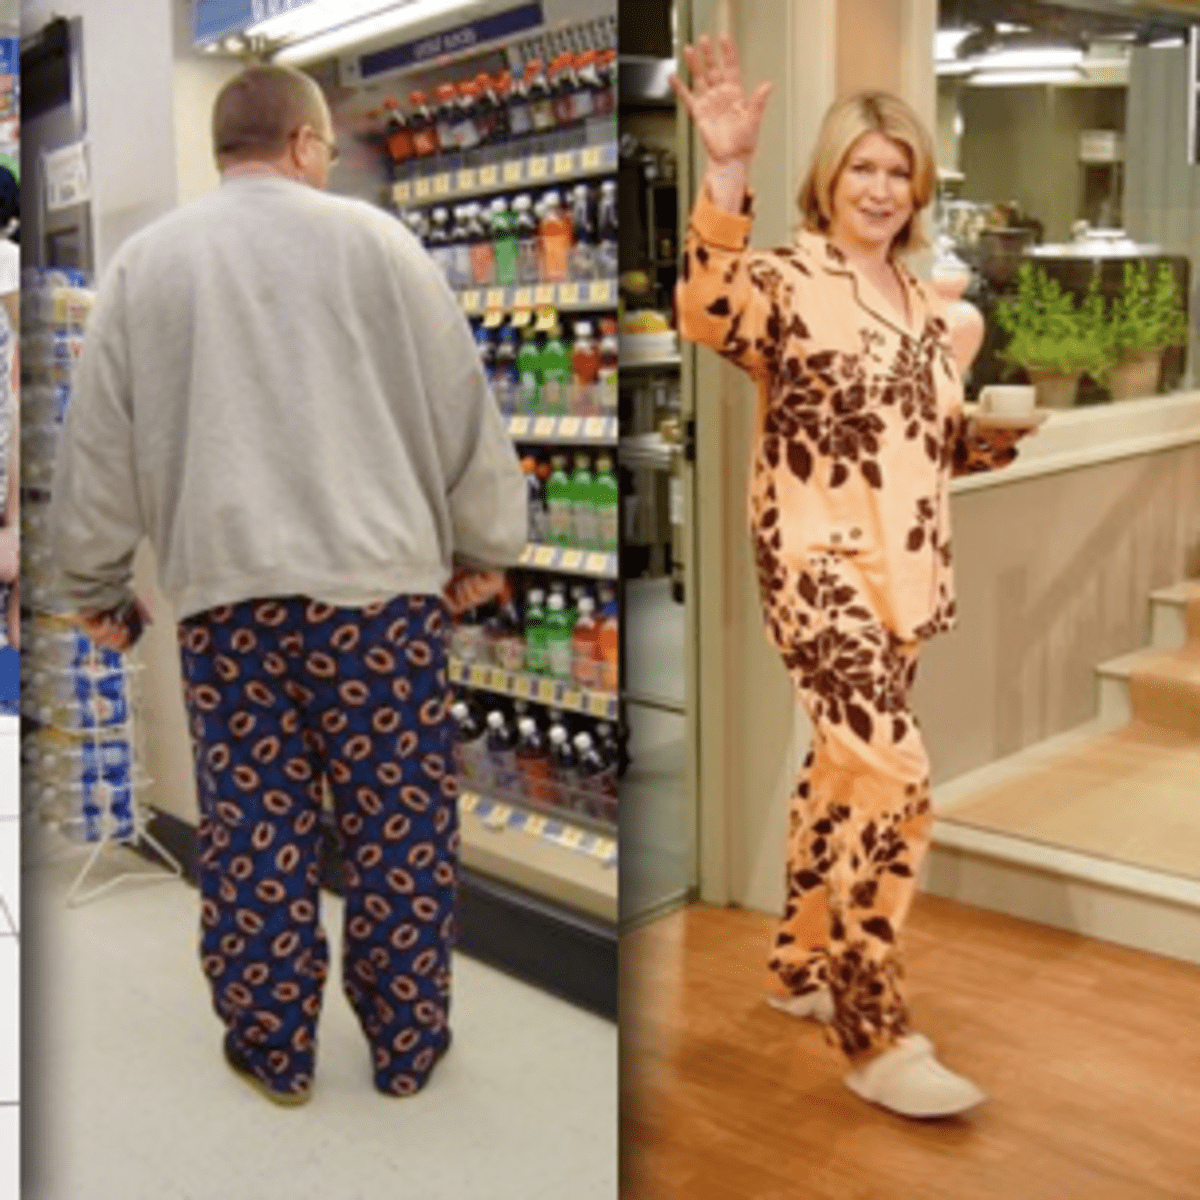 Why do Americans wear pajama pants to school or to stores? - Quora